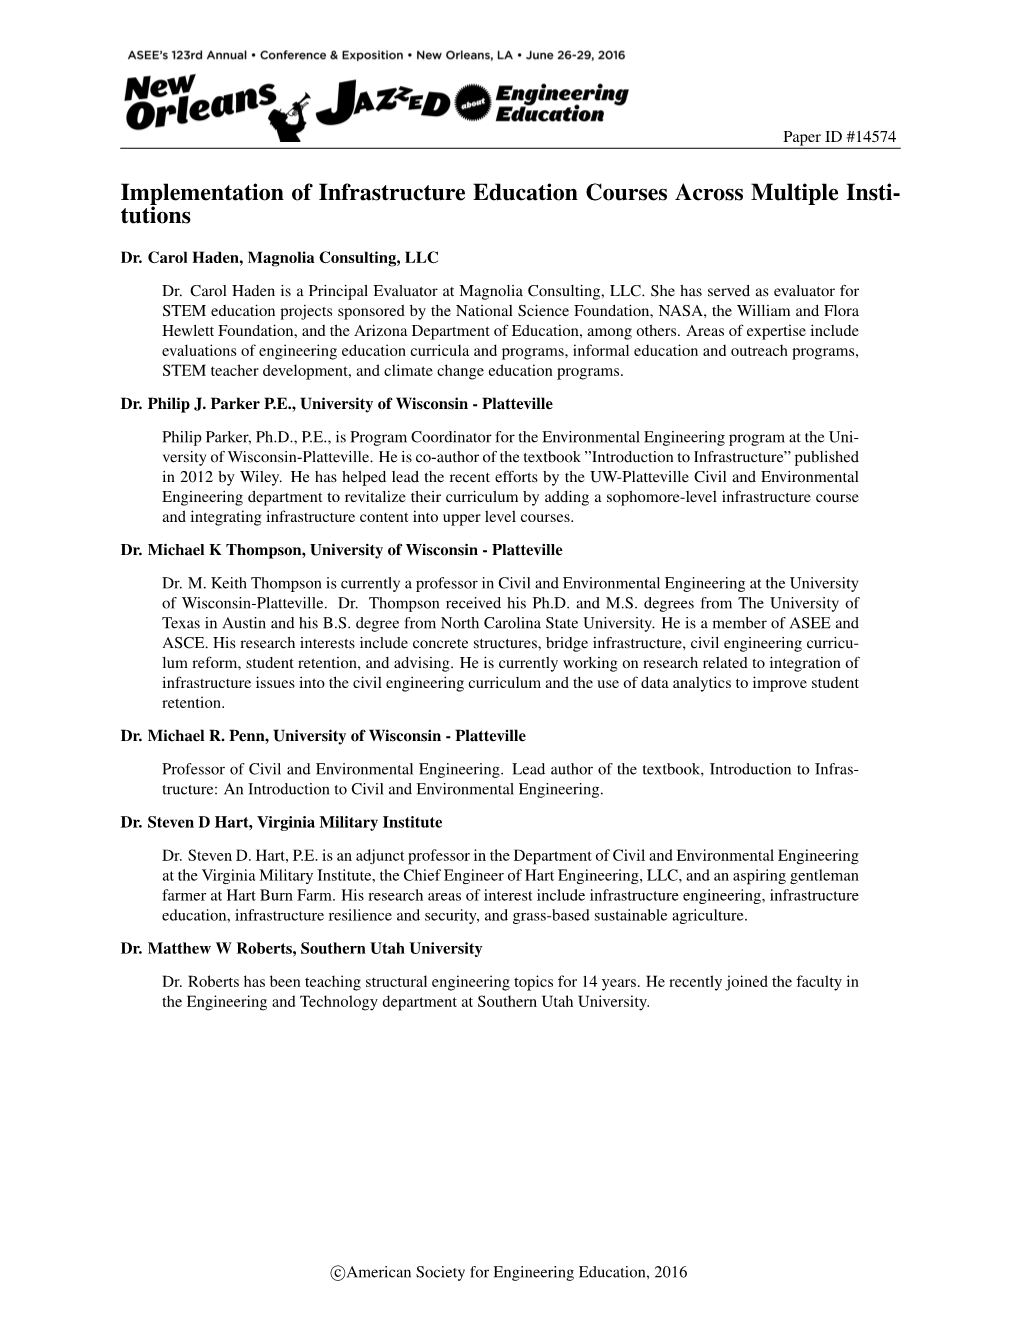 Implementation of Infrastructure Education Courses Across Multiple Institutions